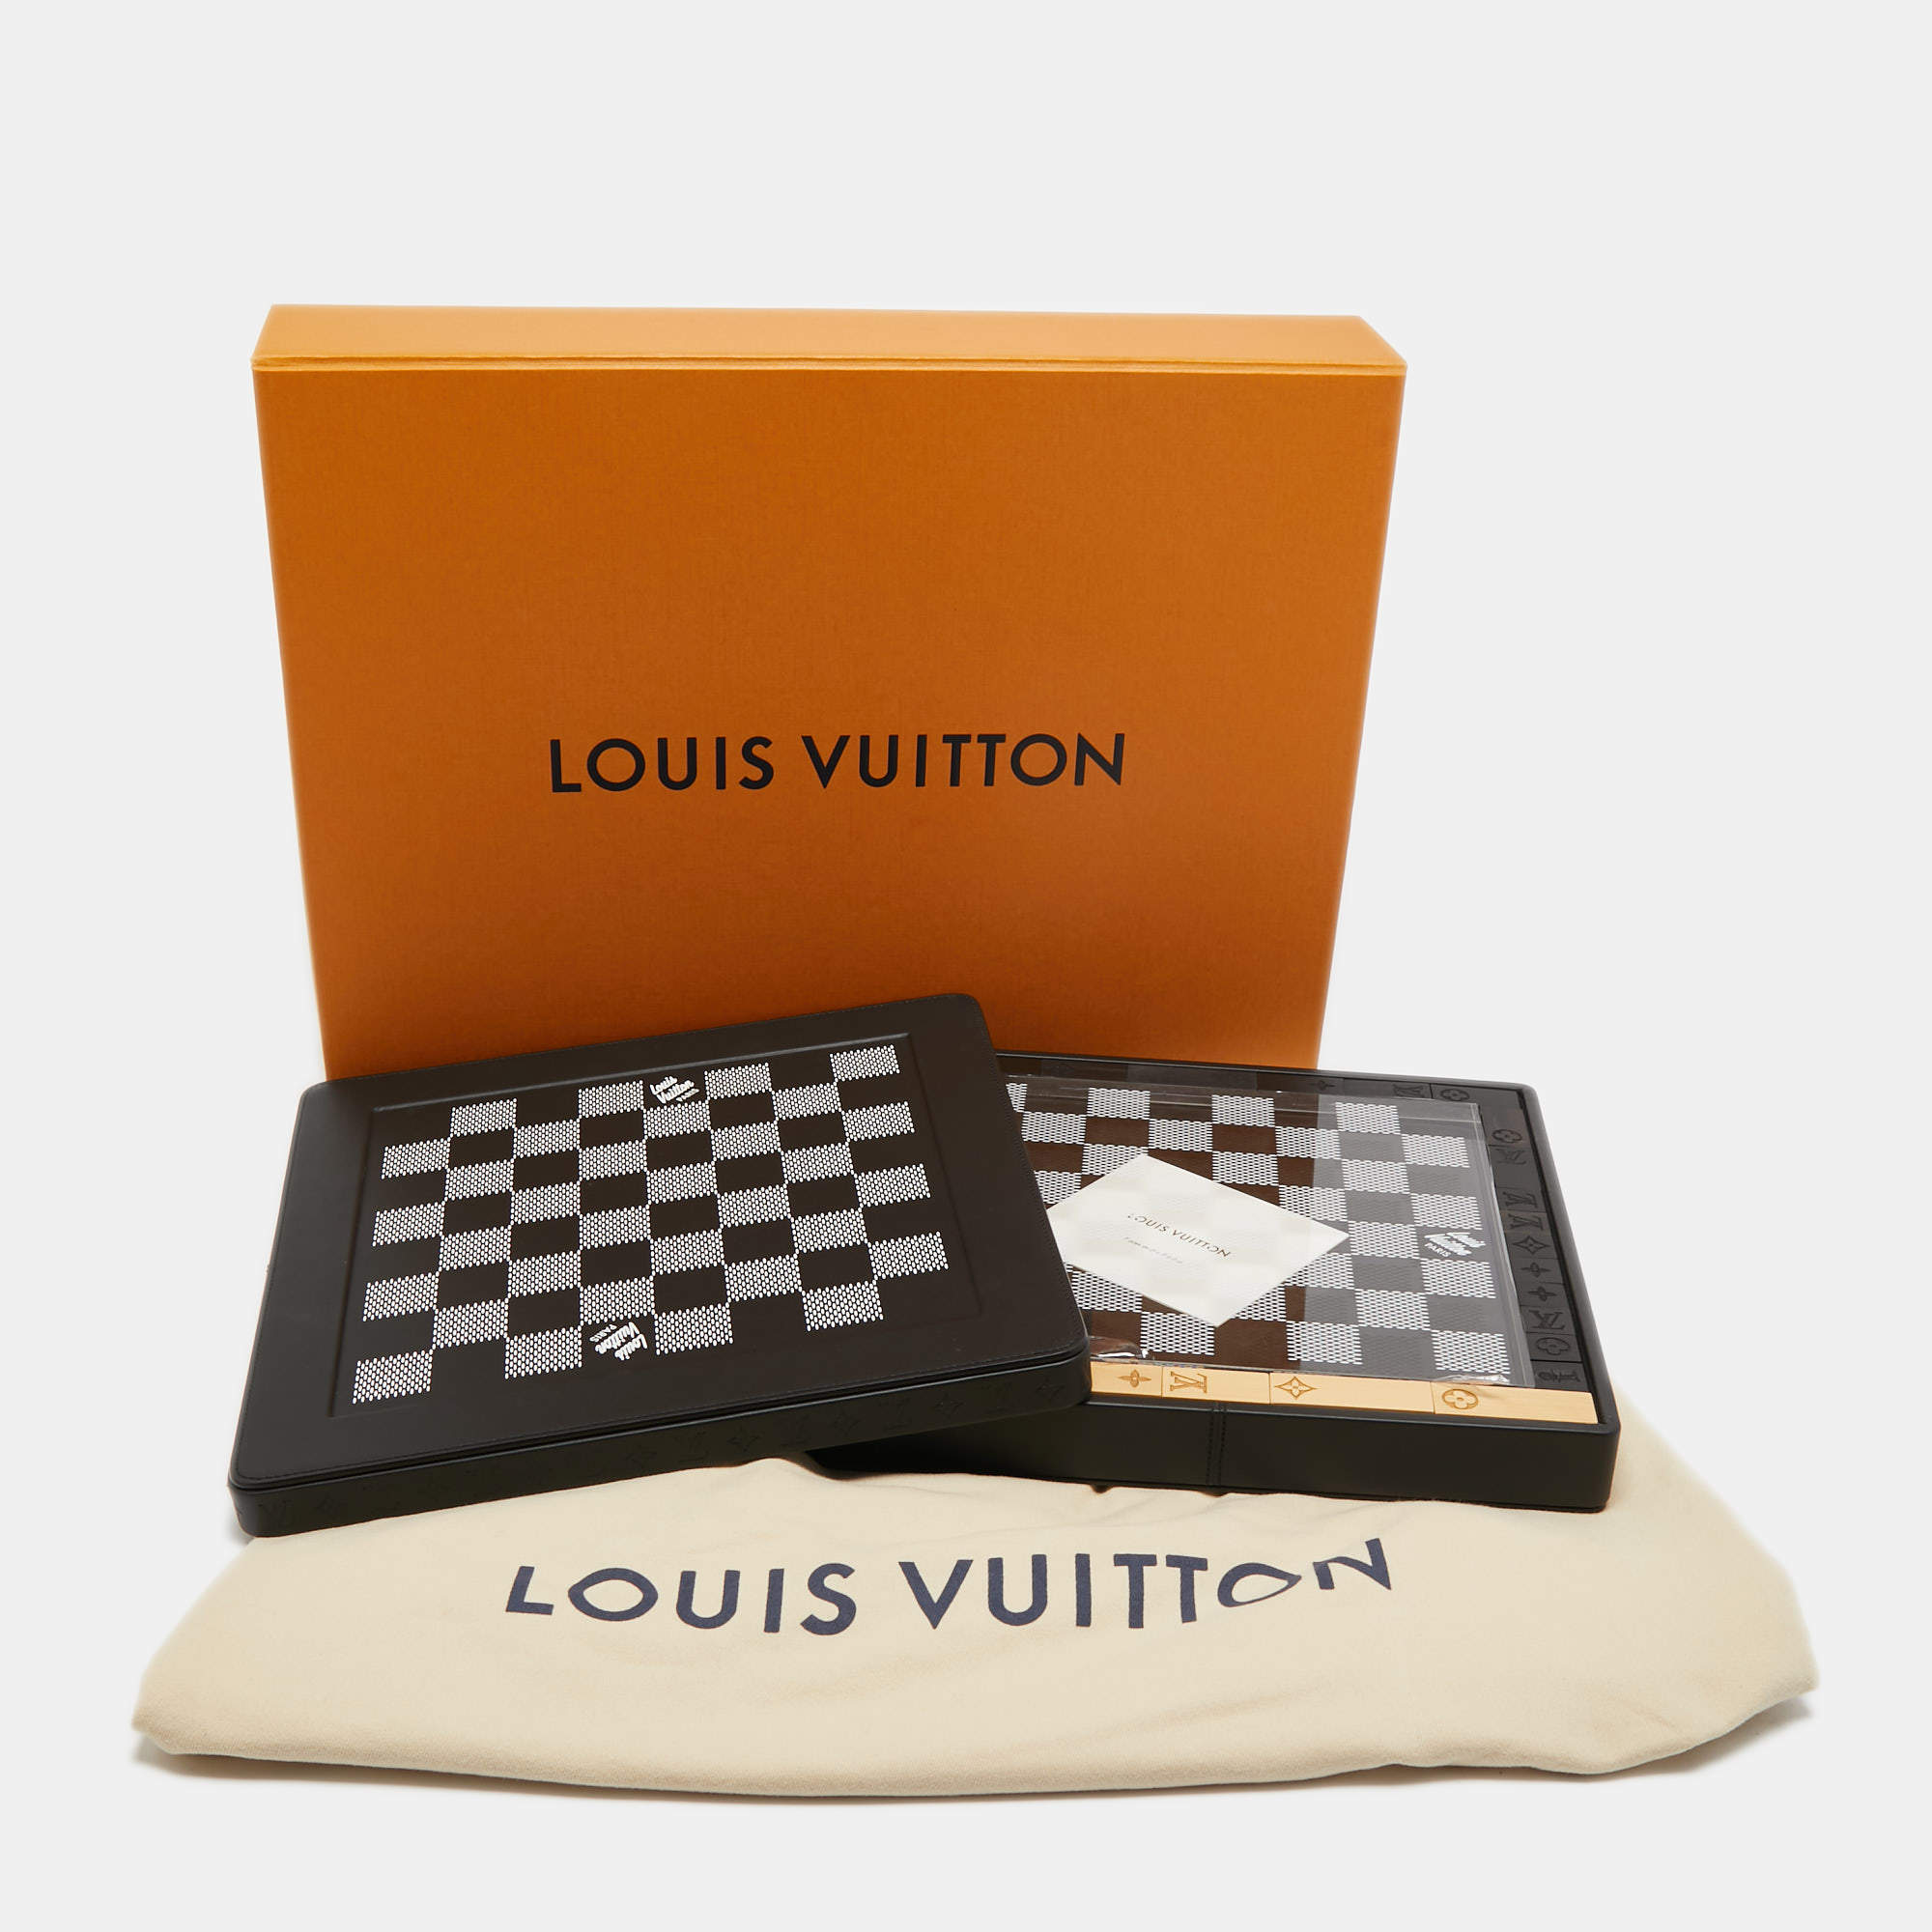 Louis Vuitton Chessboard - For Sale on 1stDibs